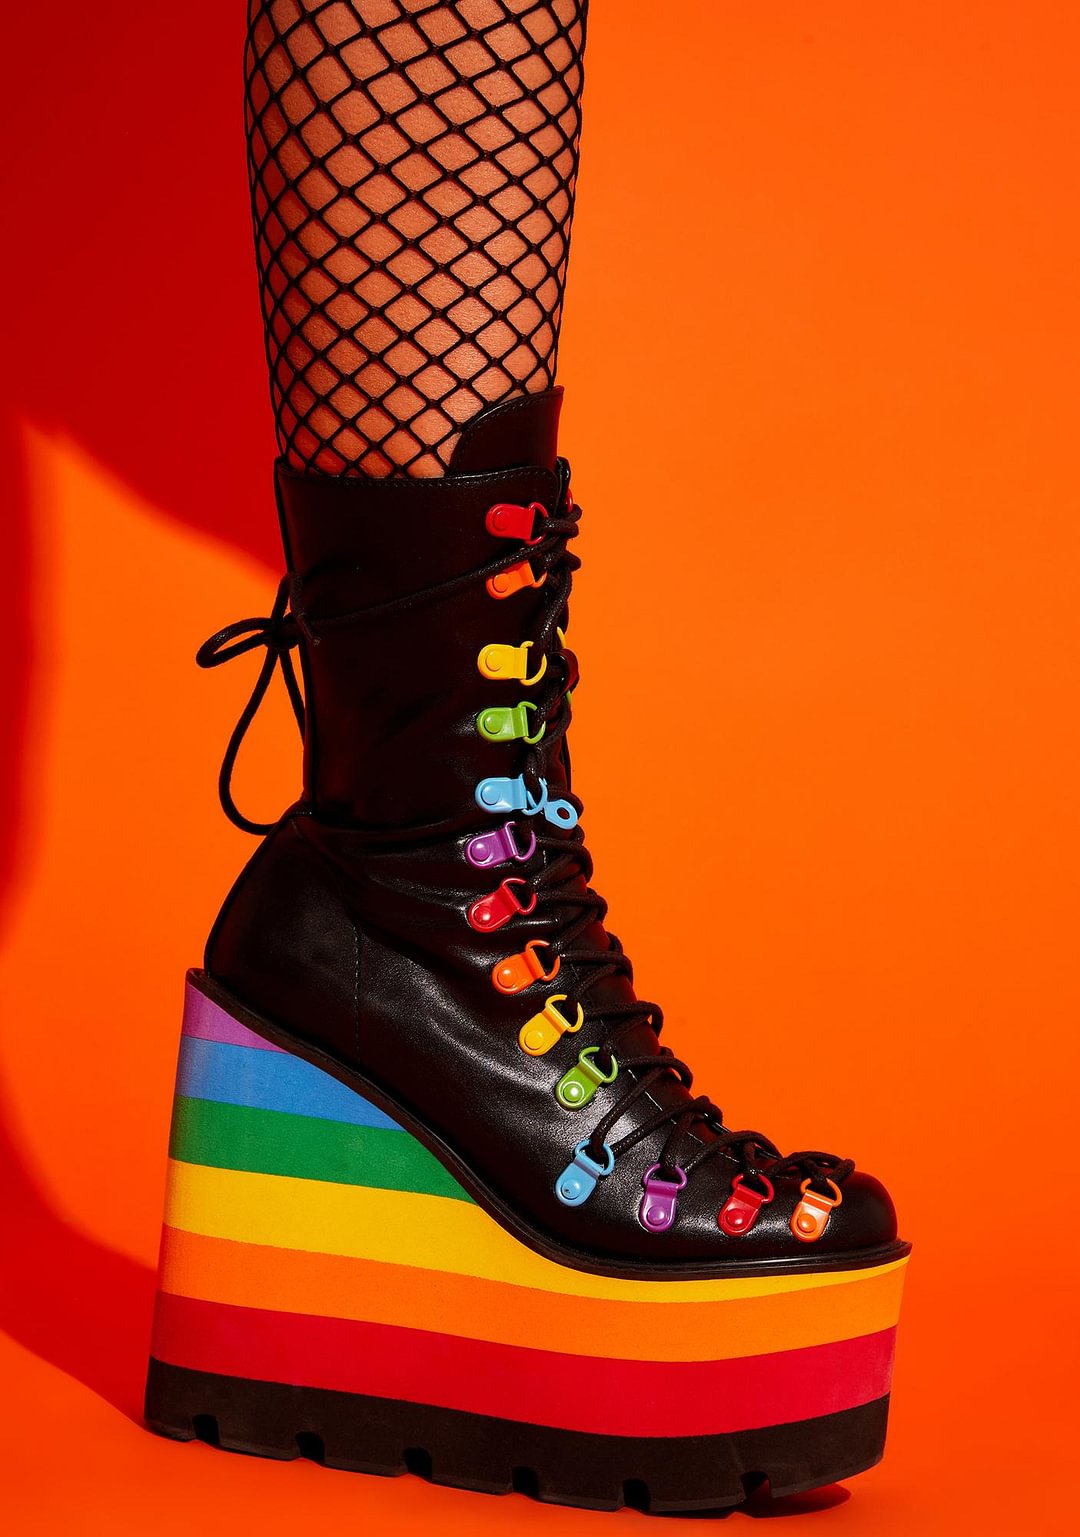 CAN'T CONTAIN MYSELF RAINBOW PLATFORM BOOTS